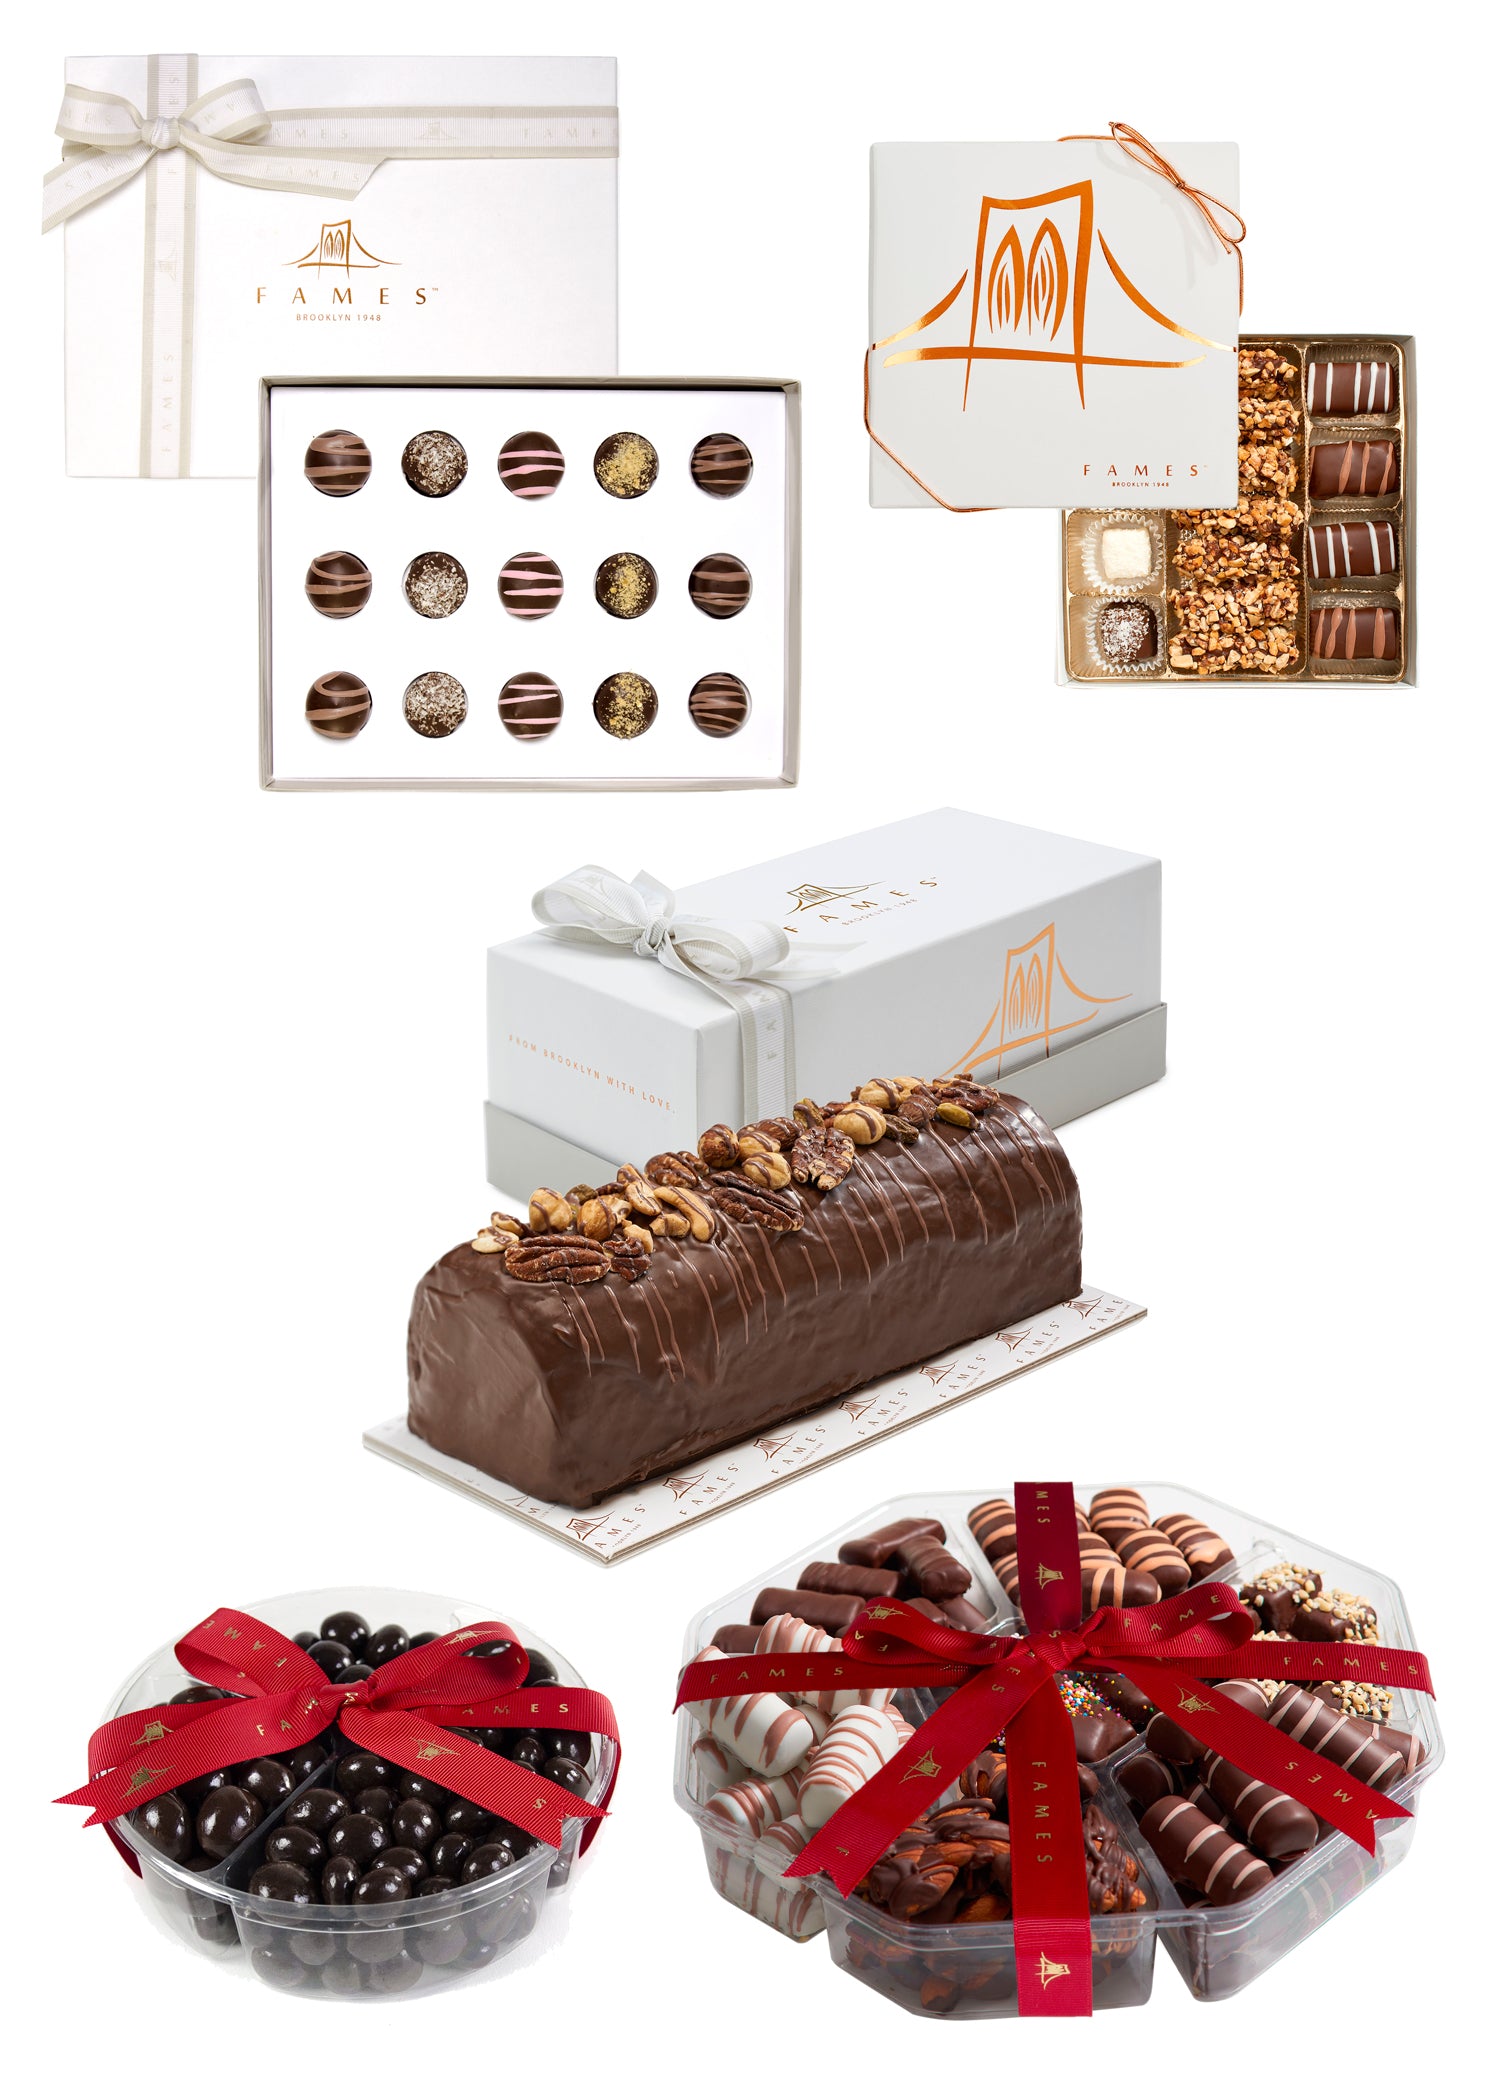 Holiday Chocolate Gift set for Families, Holiday Celebration with Festive Holiday Treats, Kosher, Dairy Free.  Fames Chocolate   